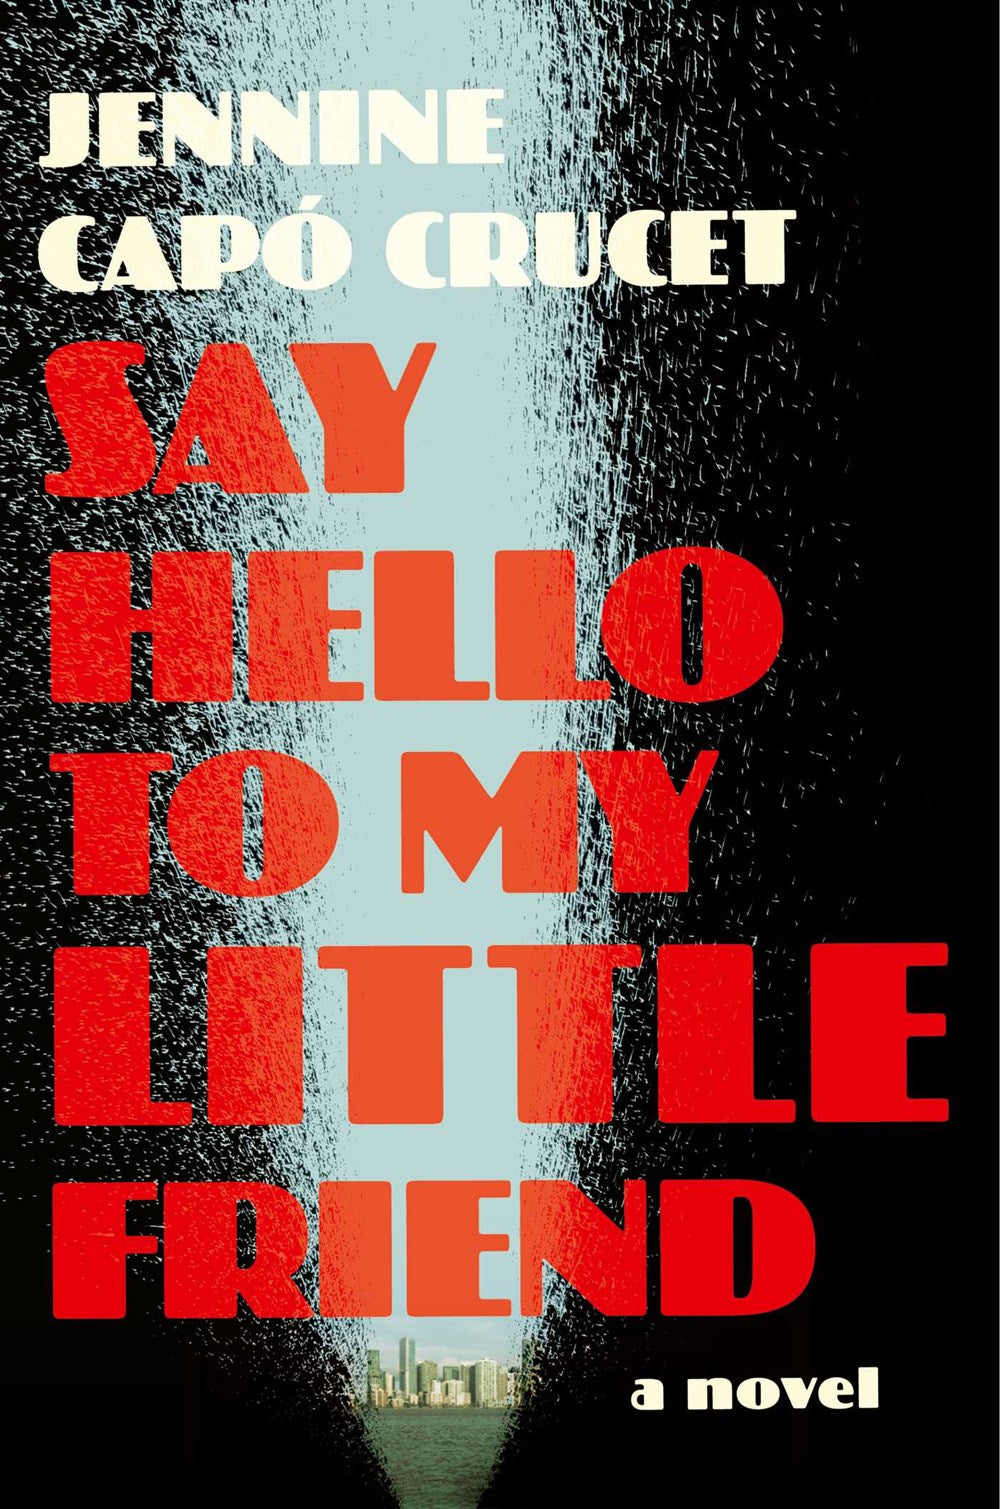 Say Hello To My Little Friend by Jennine Capó Crucet (Hardcover) (PREORDER)